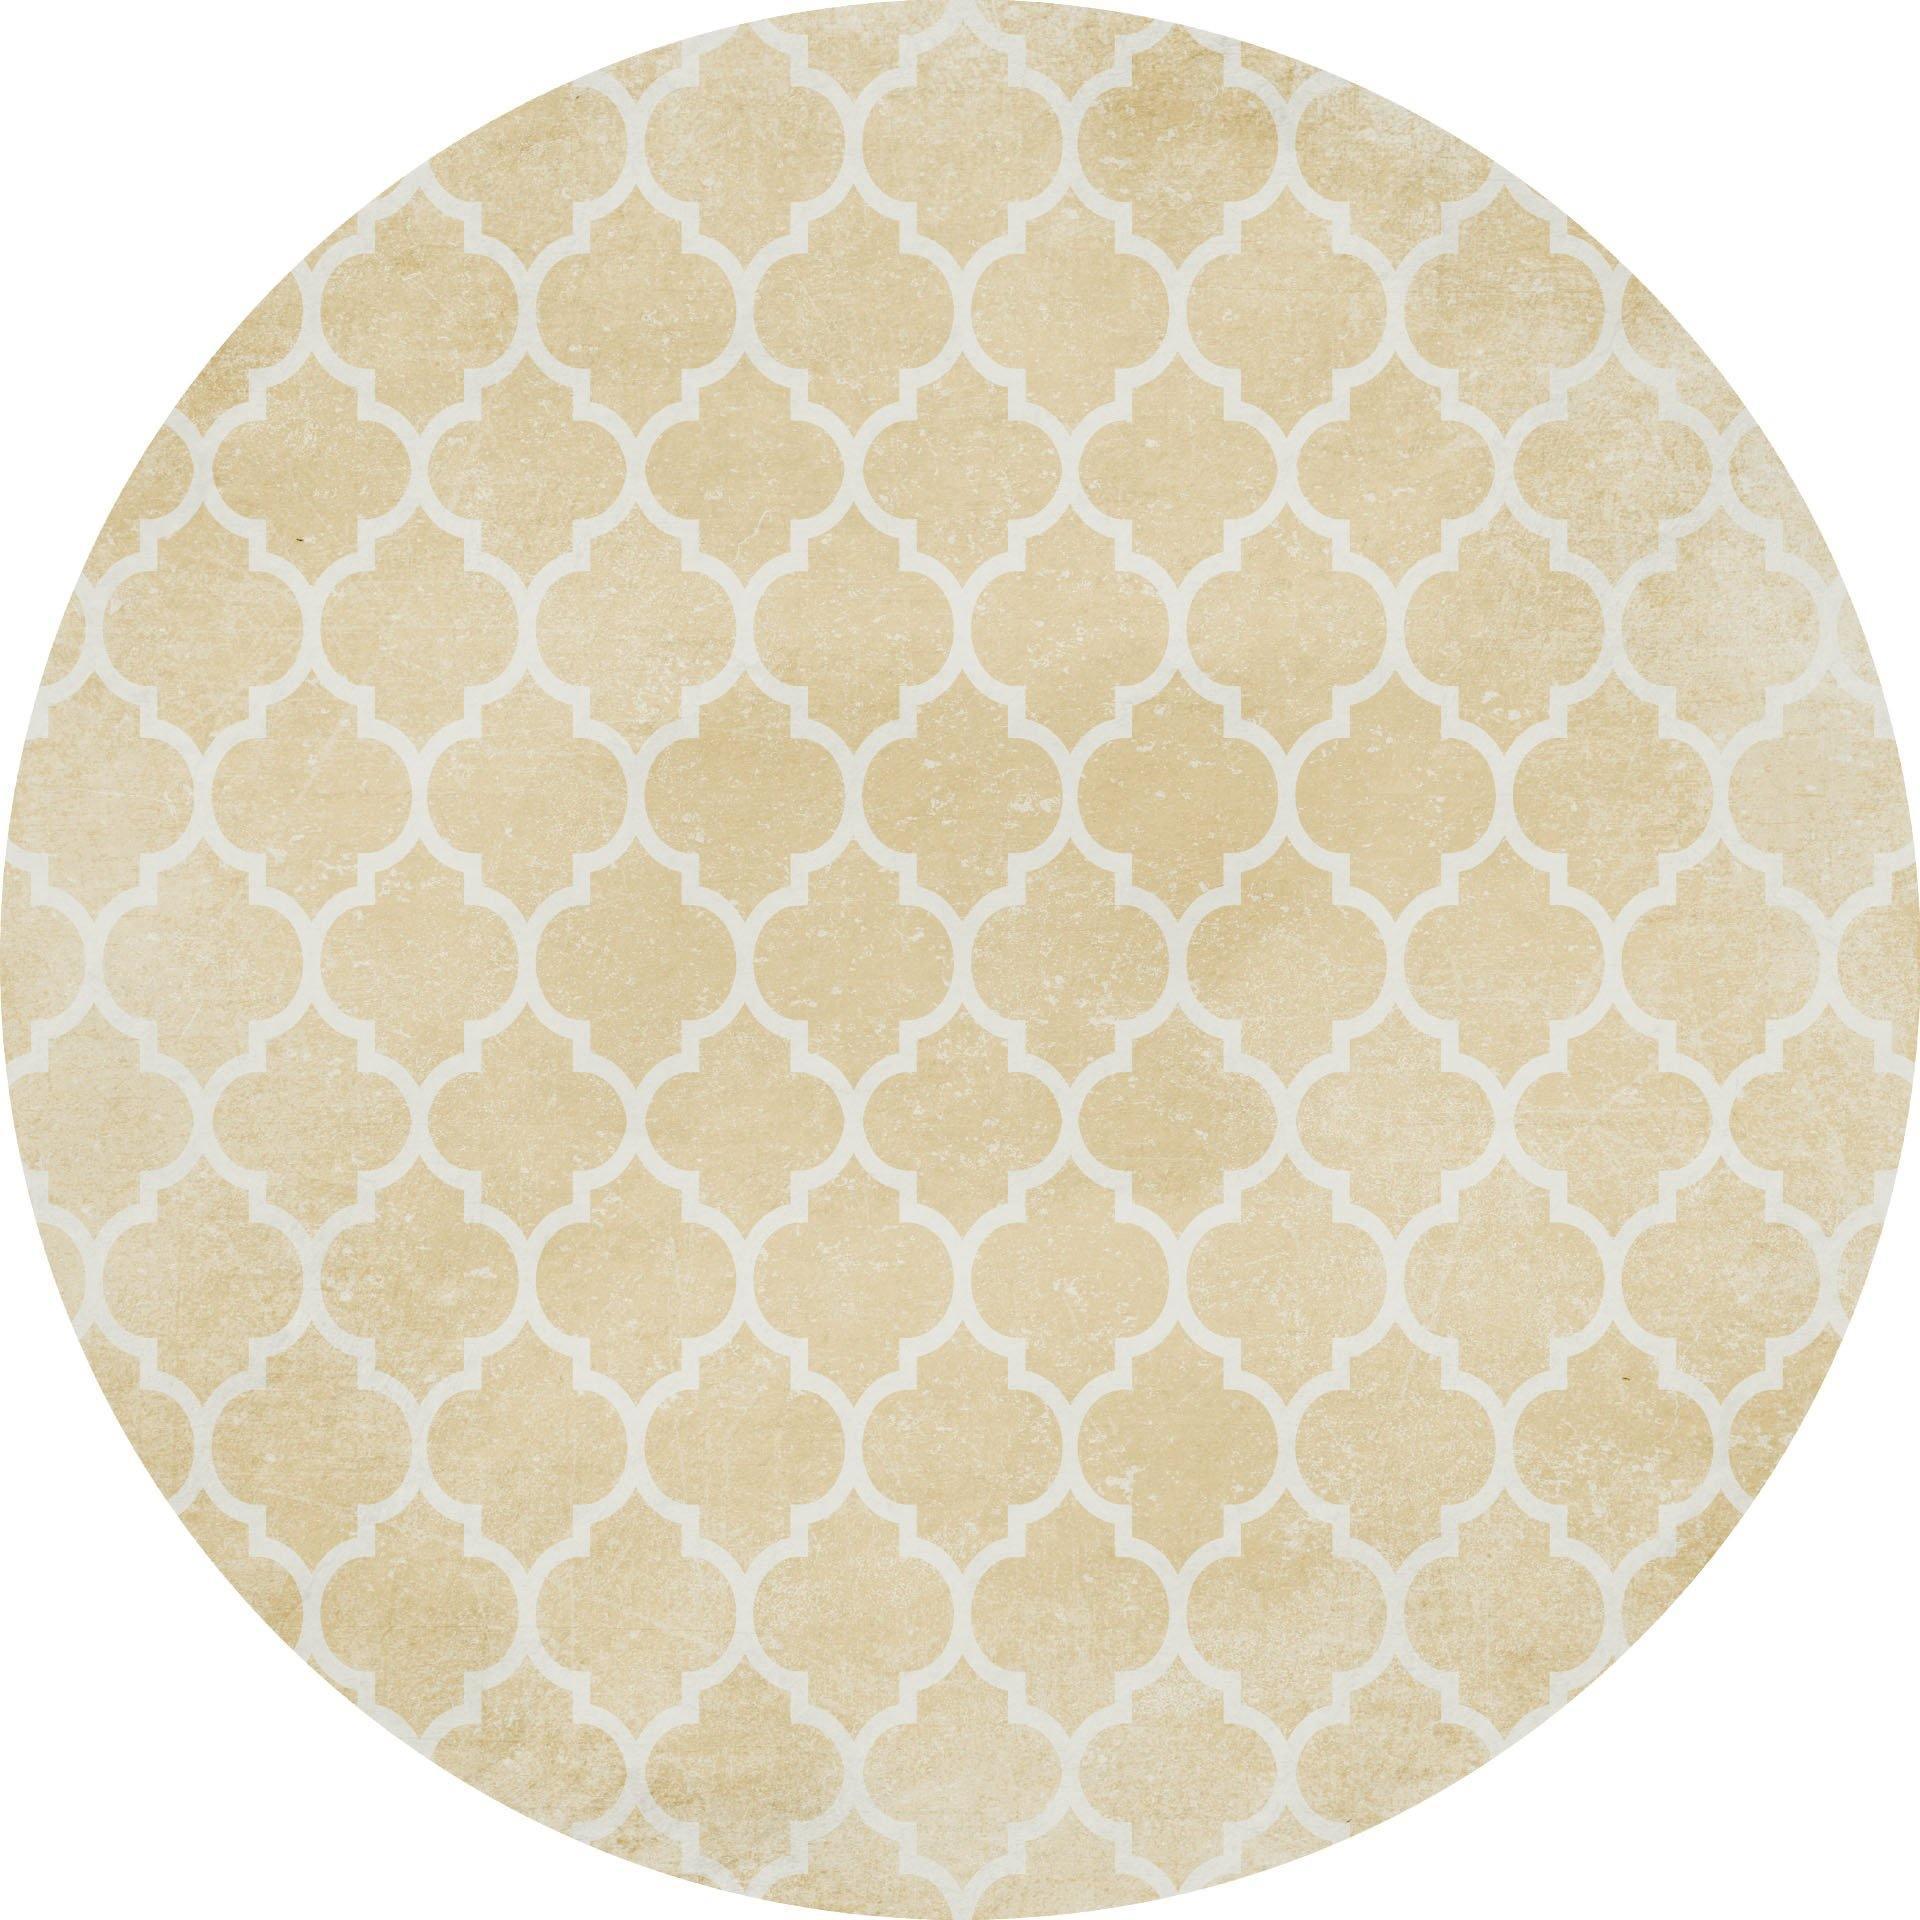 Ava Yellow 15" Round Placemat Set of 4 *Final Sale* PERFECT - Carolina Creekhouse Easy to Clean Premium Vinyl Mats